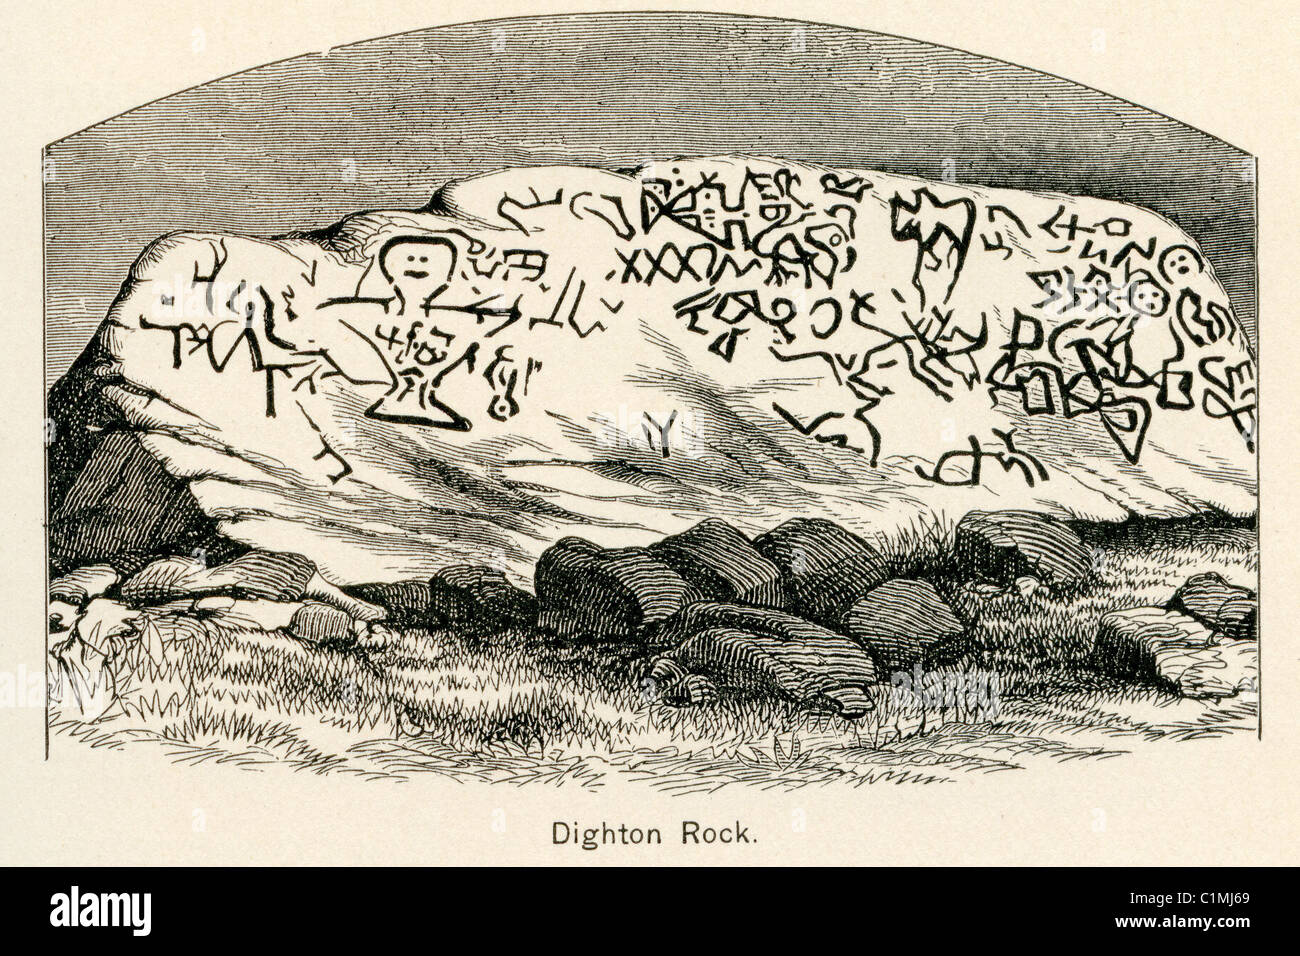 Old lithograph of Dighton Rock, Taunton River at Berkley, Massachusetts. The rock is noted for its petroglyphs. Stock Photo